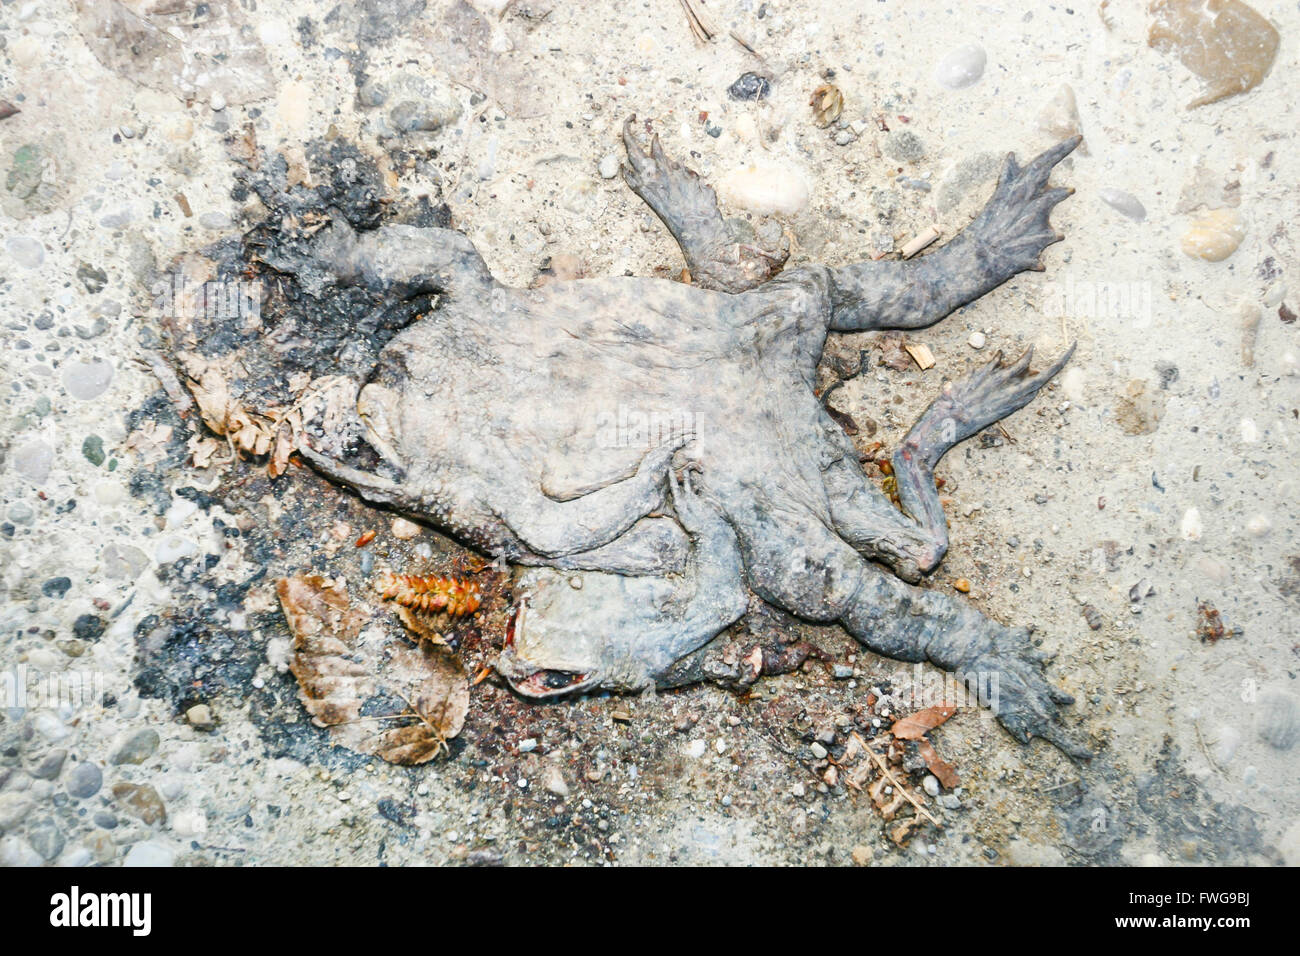 A directly above view of a squashed carrion of a frog on the sandy path. Stock Photo